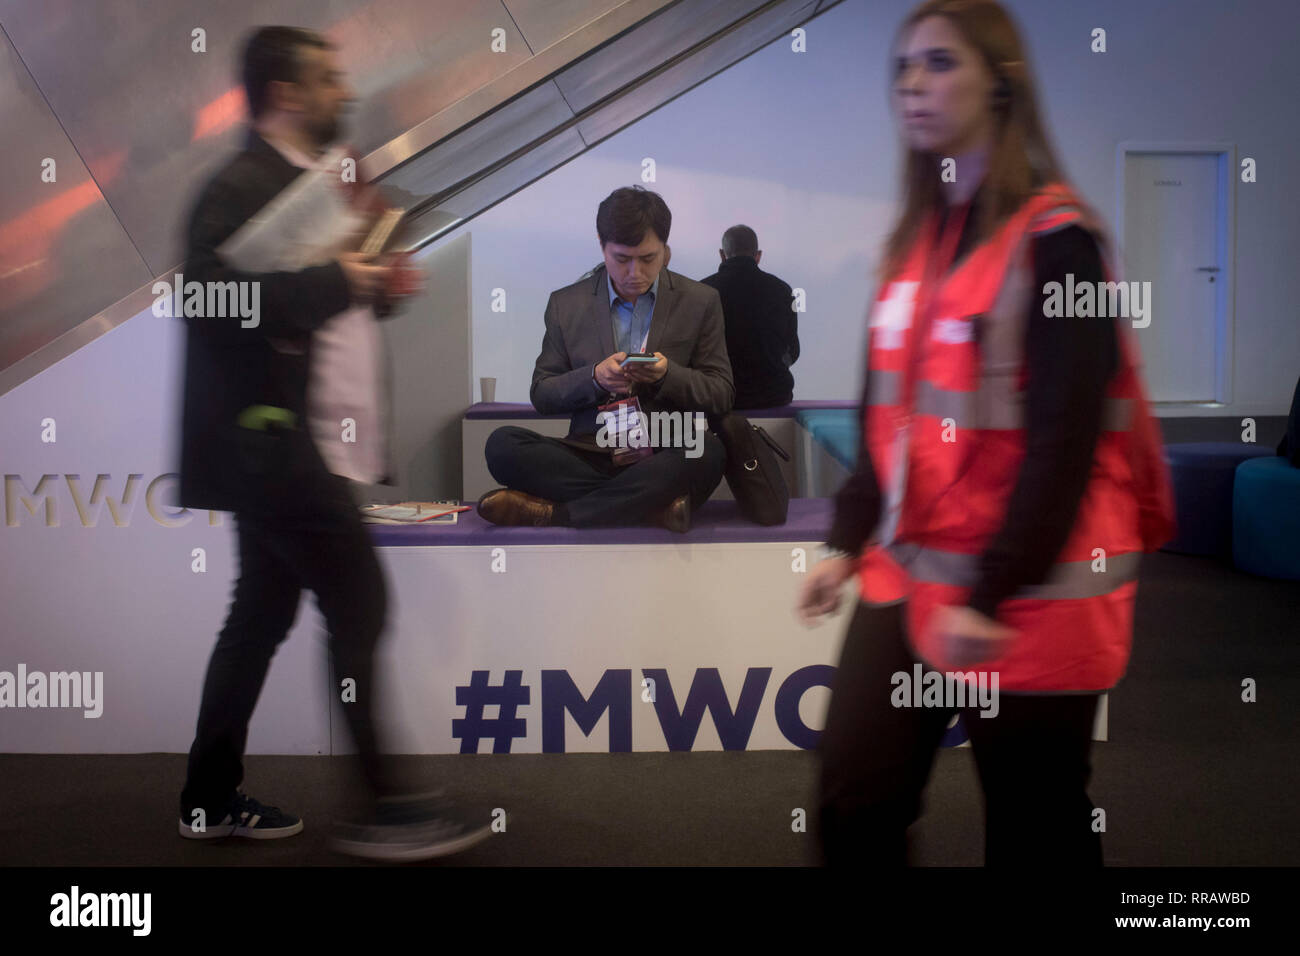 Barcelona, Spain. 25th Feb, 2019. February 25, 2019 - Barcelona, Catalonia, Spain - An attendant checks his mobile phone during the opening day of the GSMA Mobile World Congress 2019 in Barcelona, the world's most important event on communication from mobile devices bringing togeteher the leading companies and the latest developments in the sector. Credit: Jordi Boixareu/Alamy Live News Stock Photo